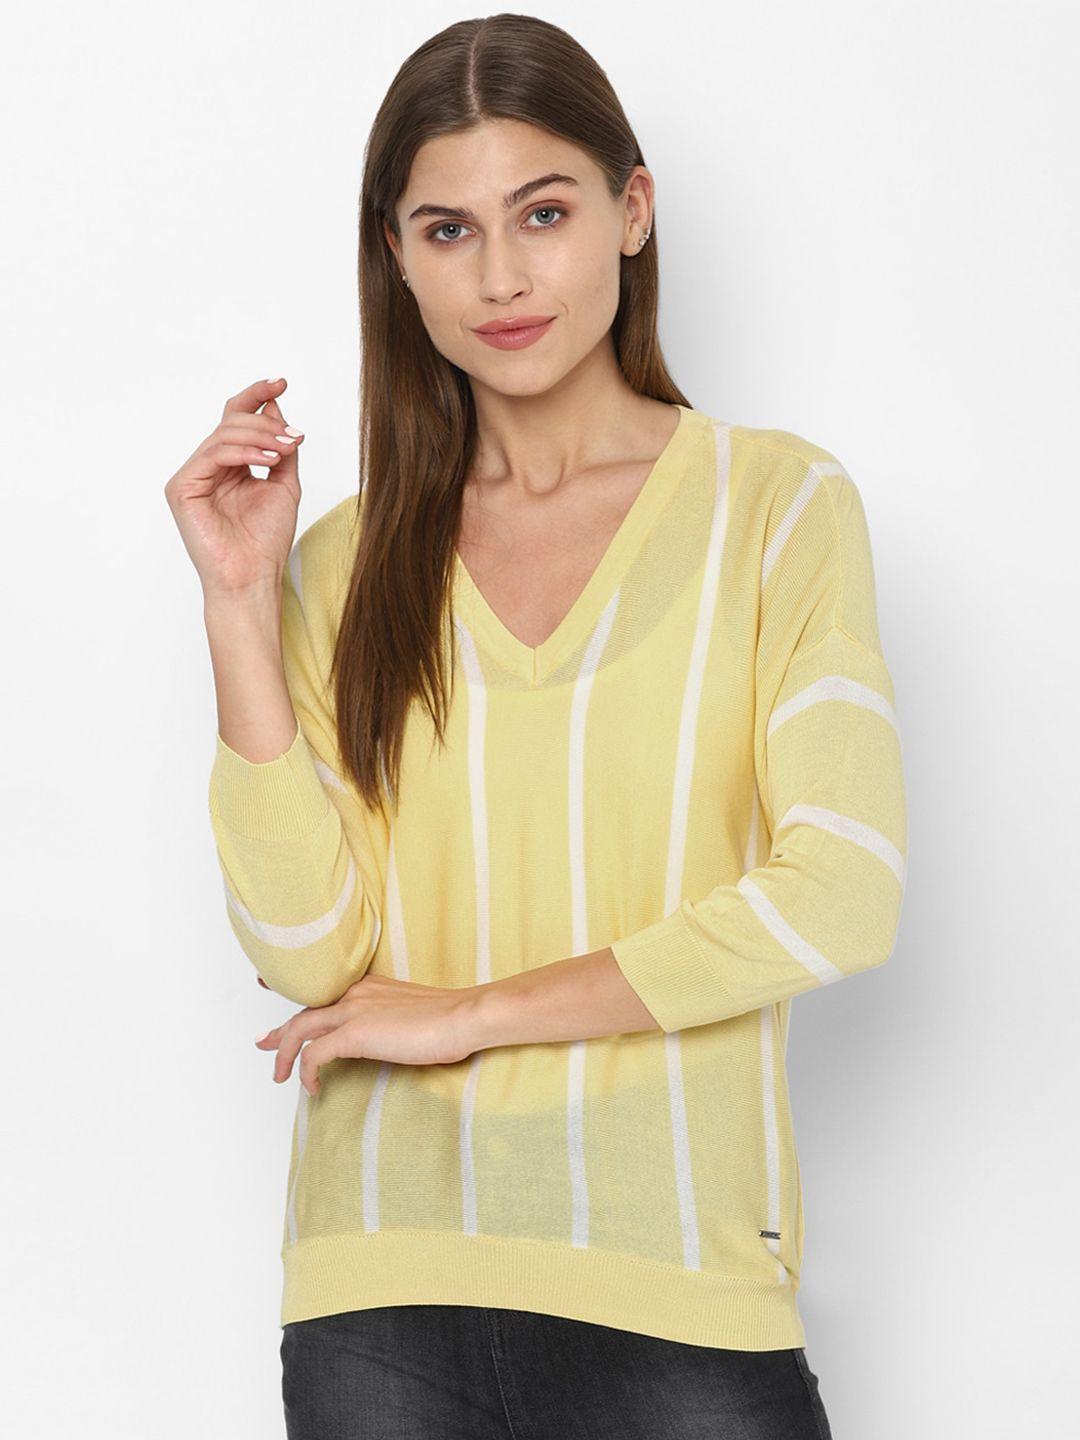 allen solly woman yellow striped top